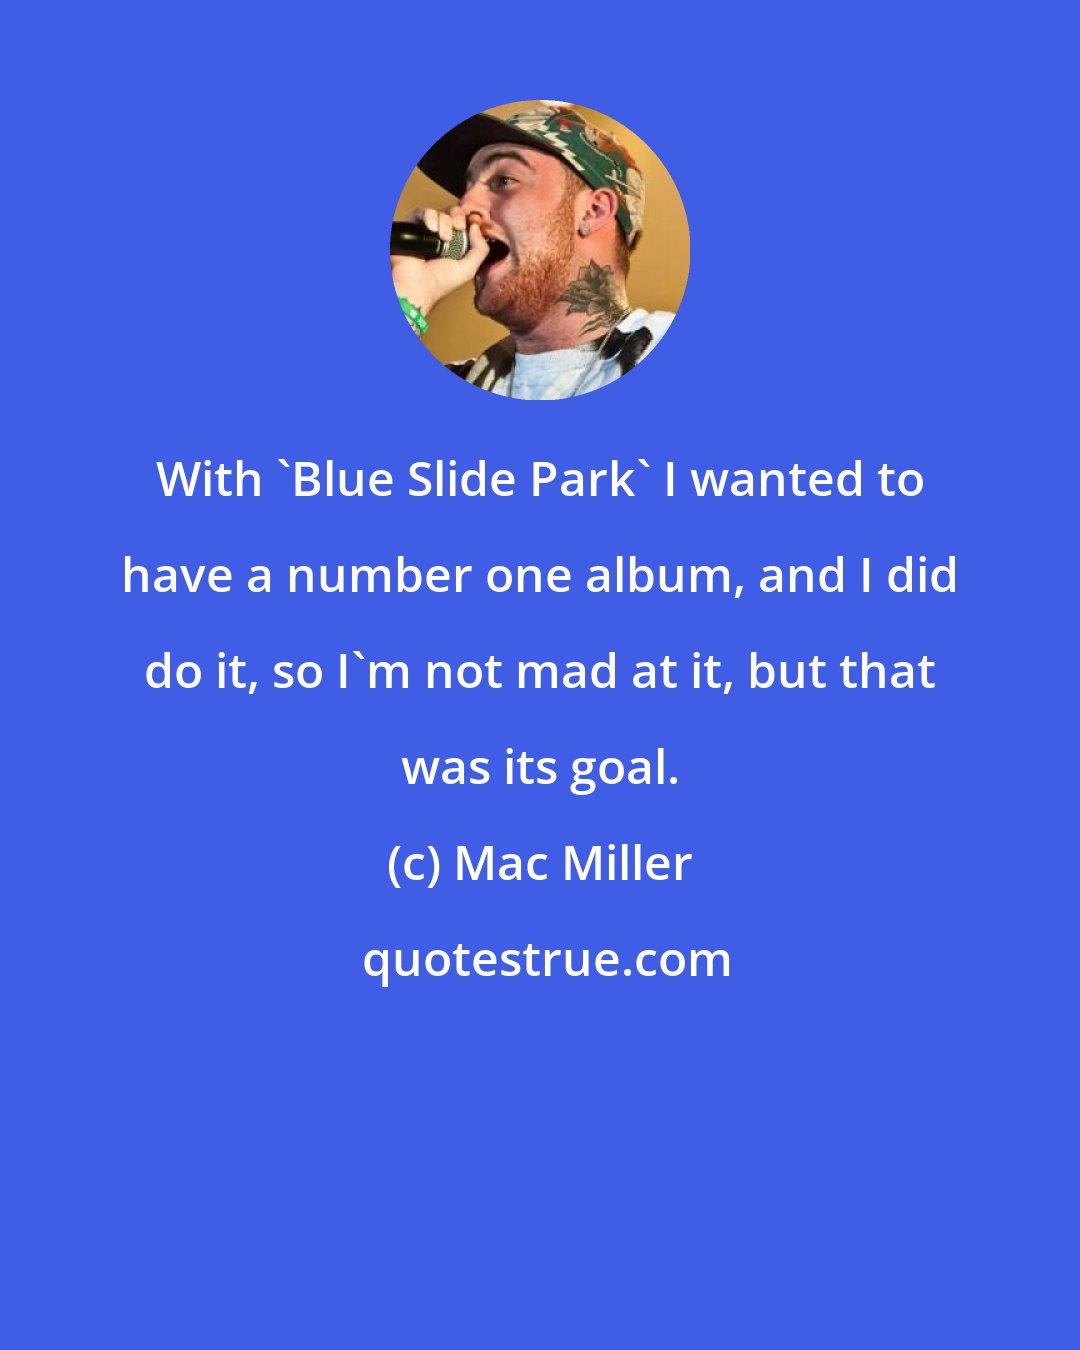 Mac Miller: With 'Blue Slide Park' I wanted to have a number one album, and I did do it, so I'm not mad at it, but that was its goal.